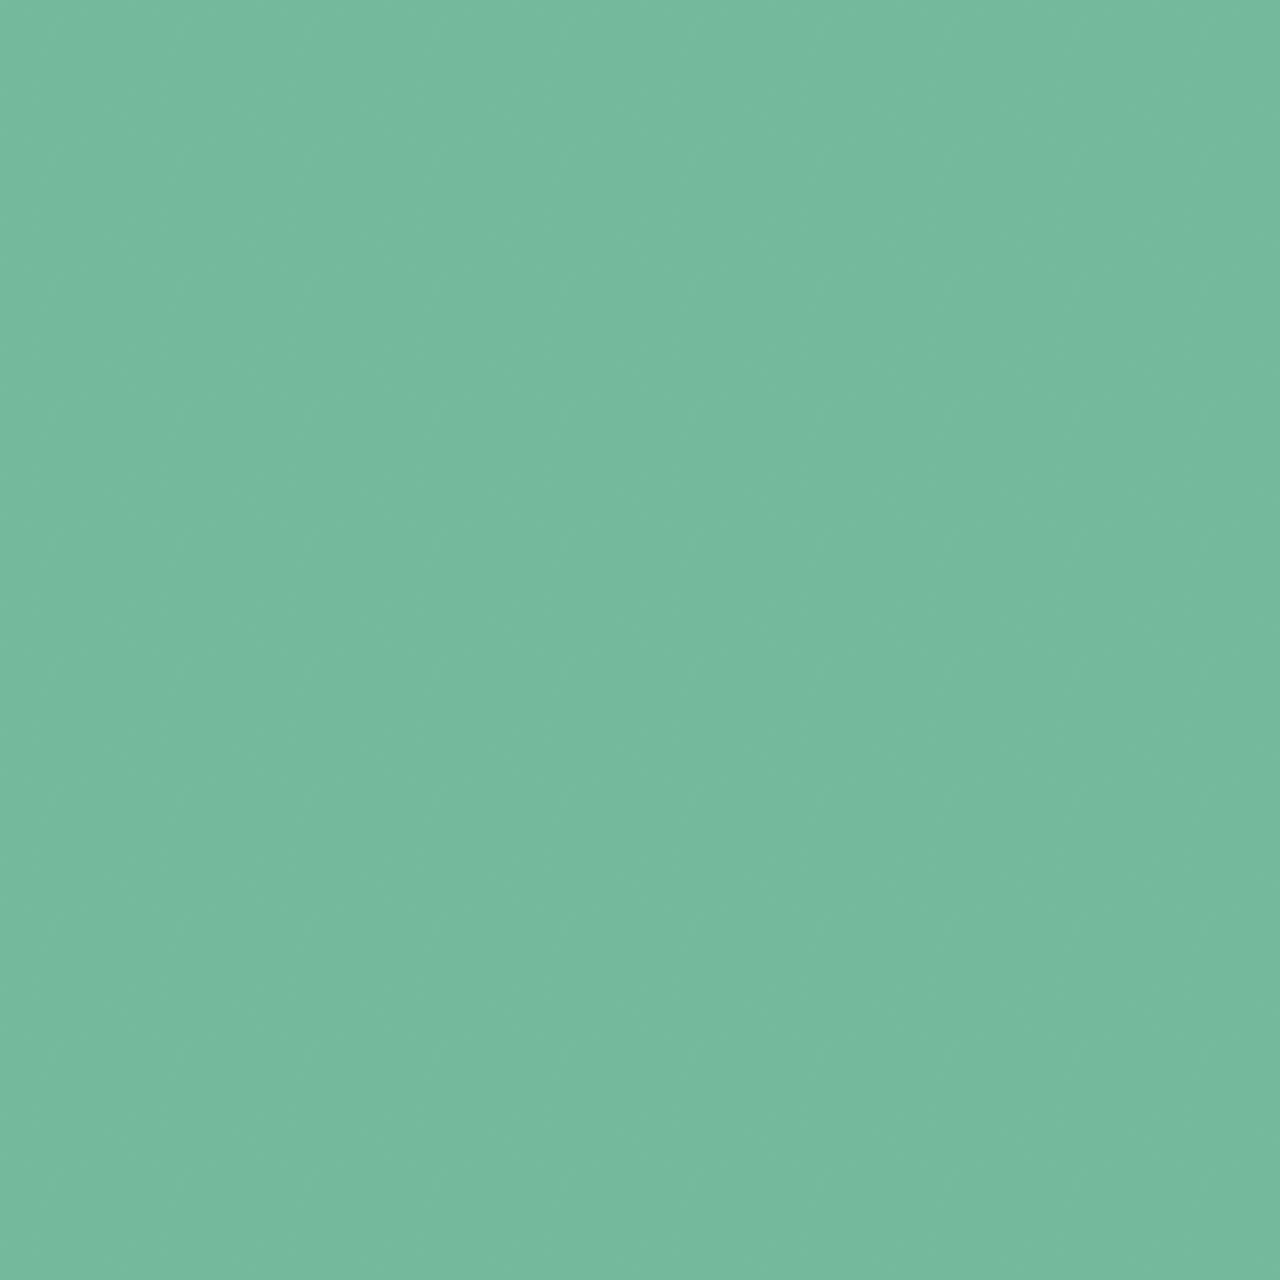 Jade 121-039 PBS Fabrics Painter's Palette Solids collection